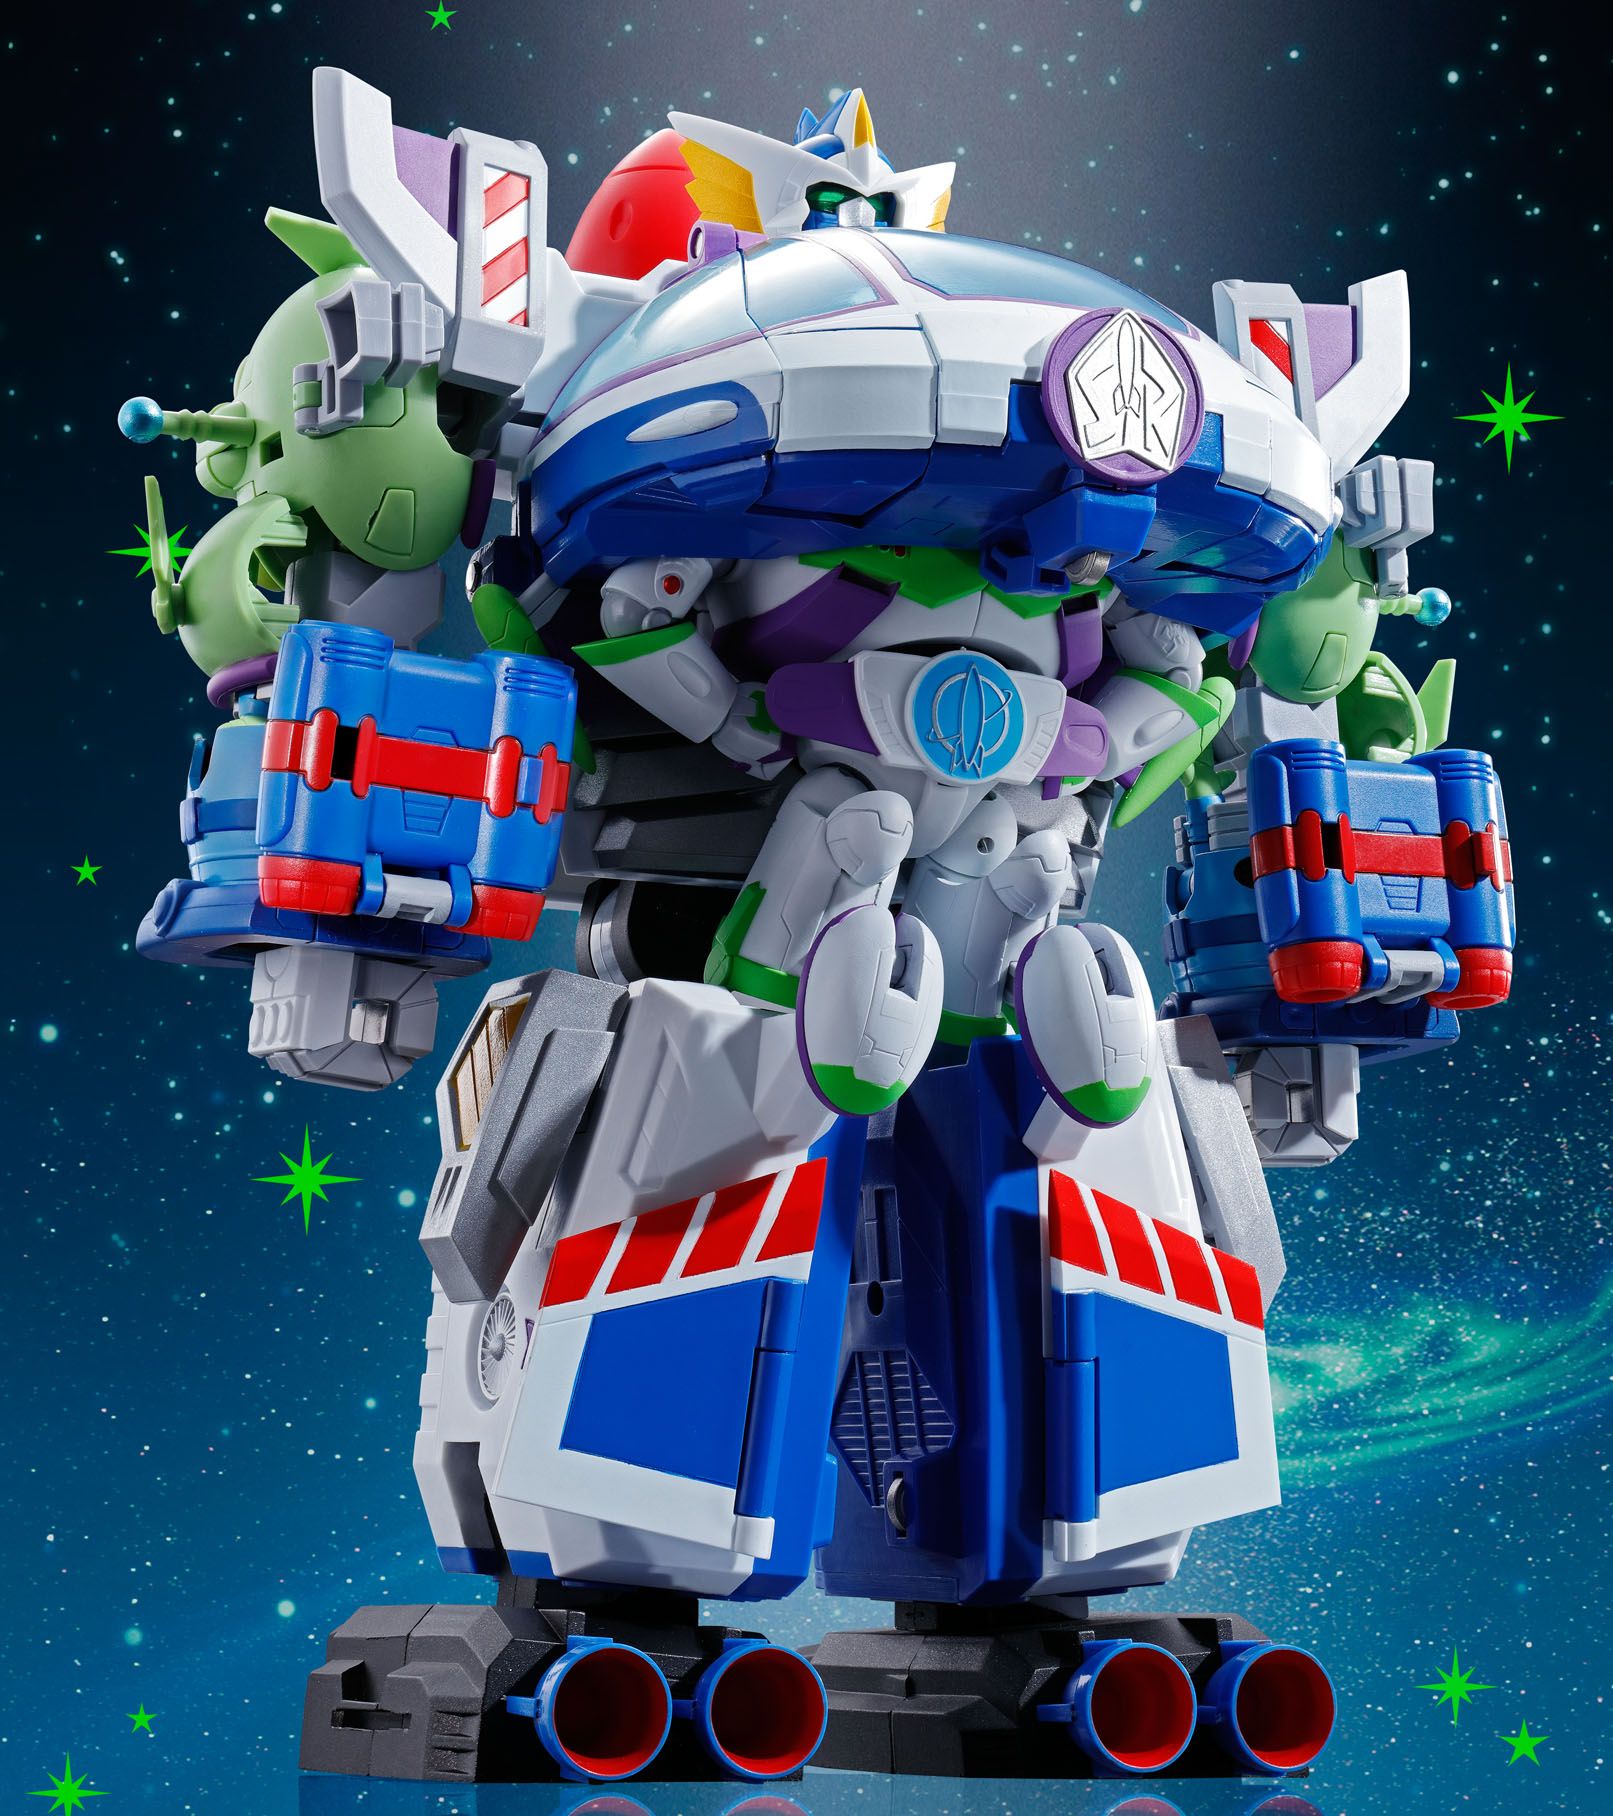 Toy Story Characters by Bandai Form a Voltron-Like Mega-Toy | Collider1613 x 1816